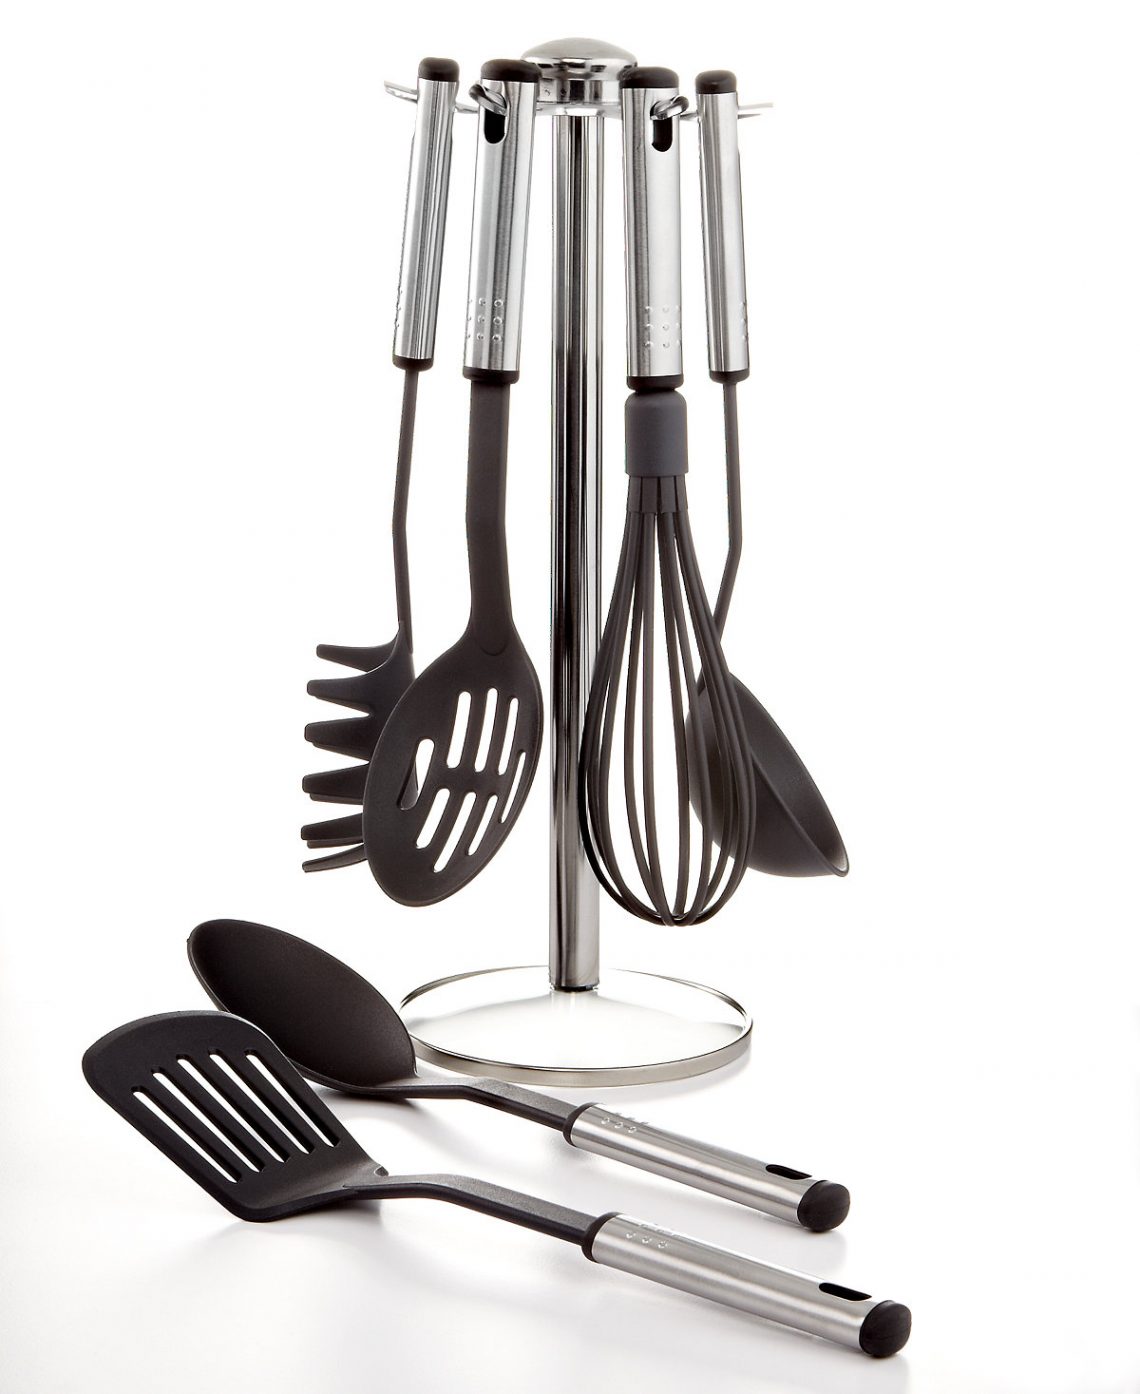 Basics 7 Piece Kitchen Utensil Set With Stand Only At Macys 1140x1394 